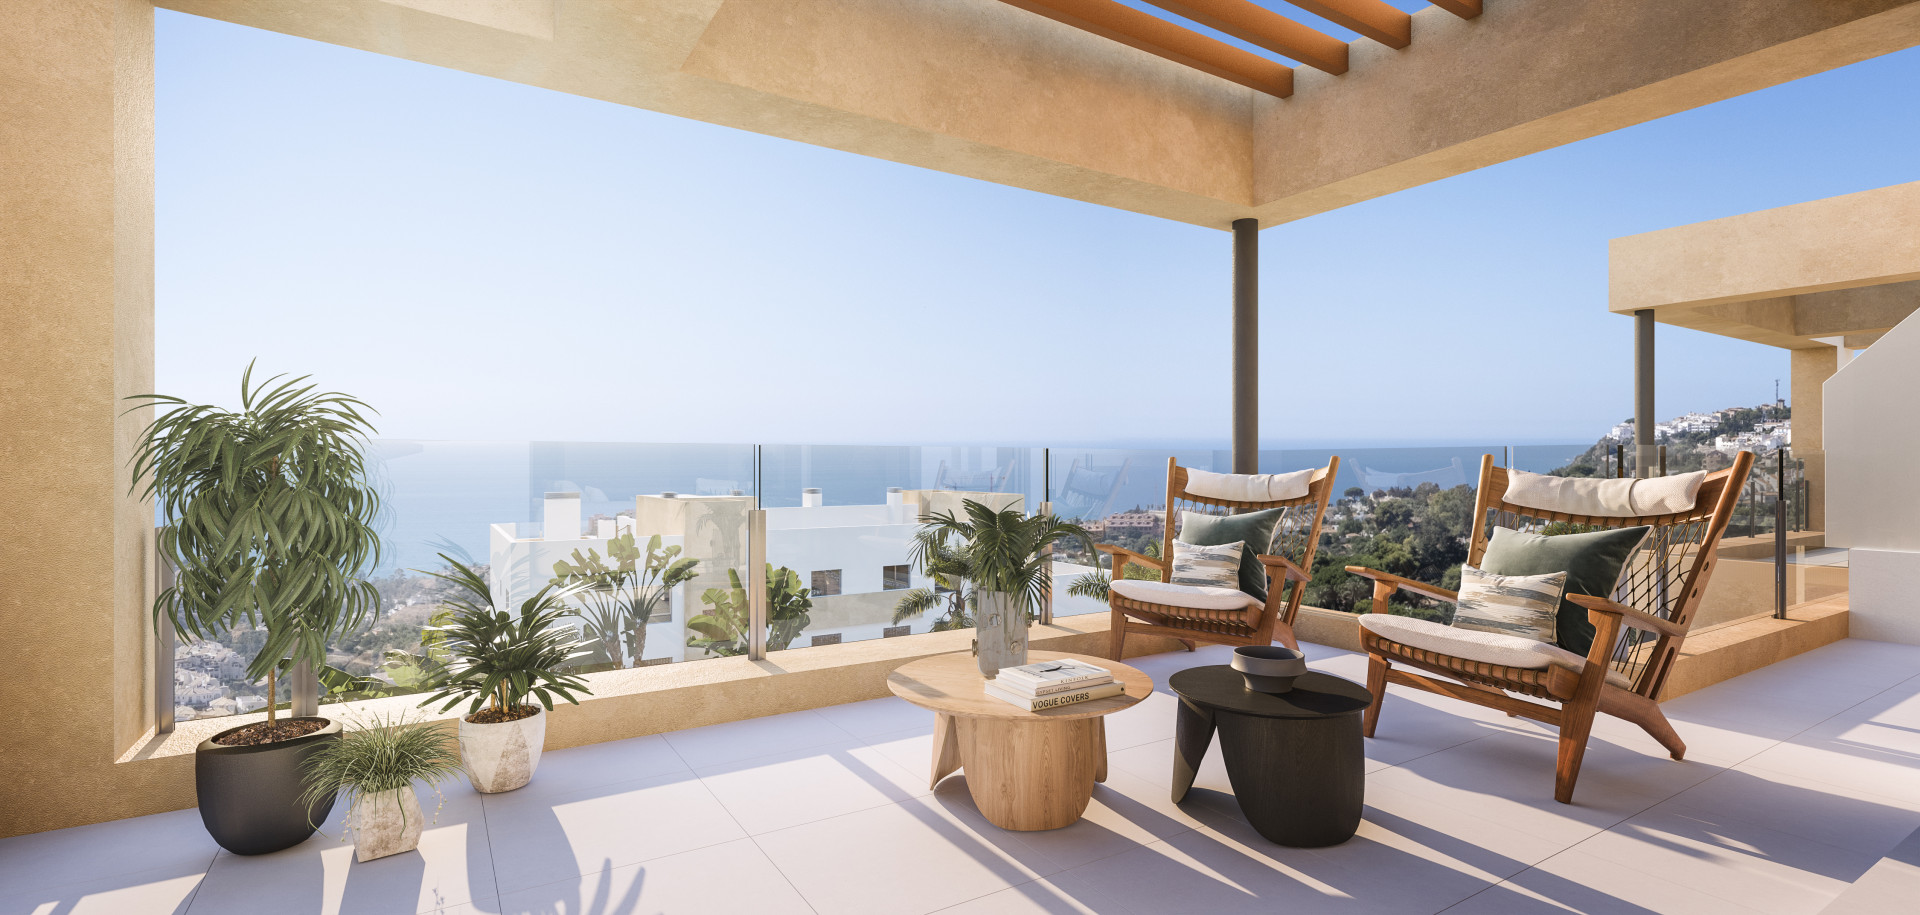 Mane Residences: Exclusive residential complex of flats and townhouses with panoramic sea views in Benalmádena. | Image 1